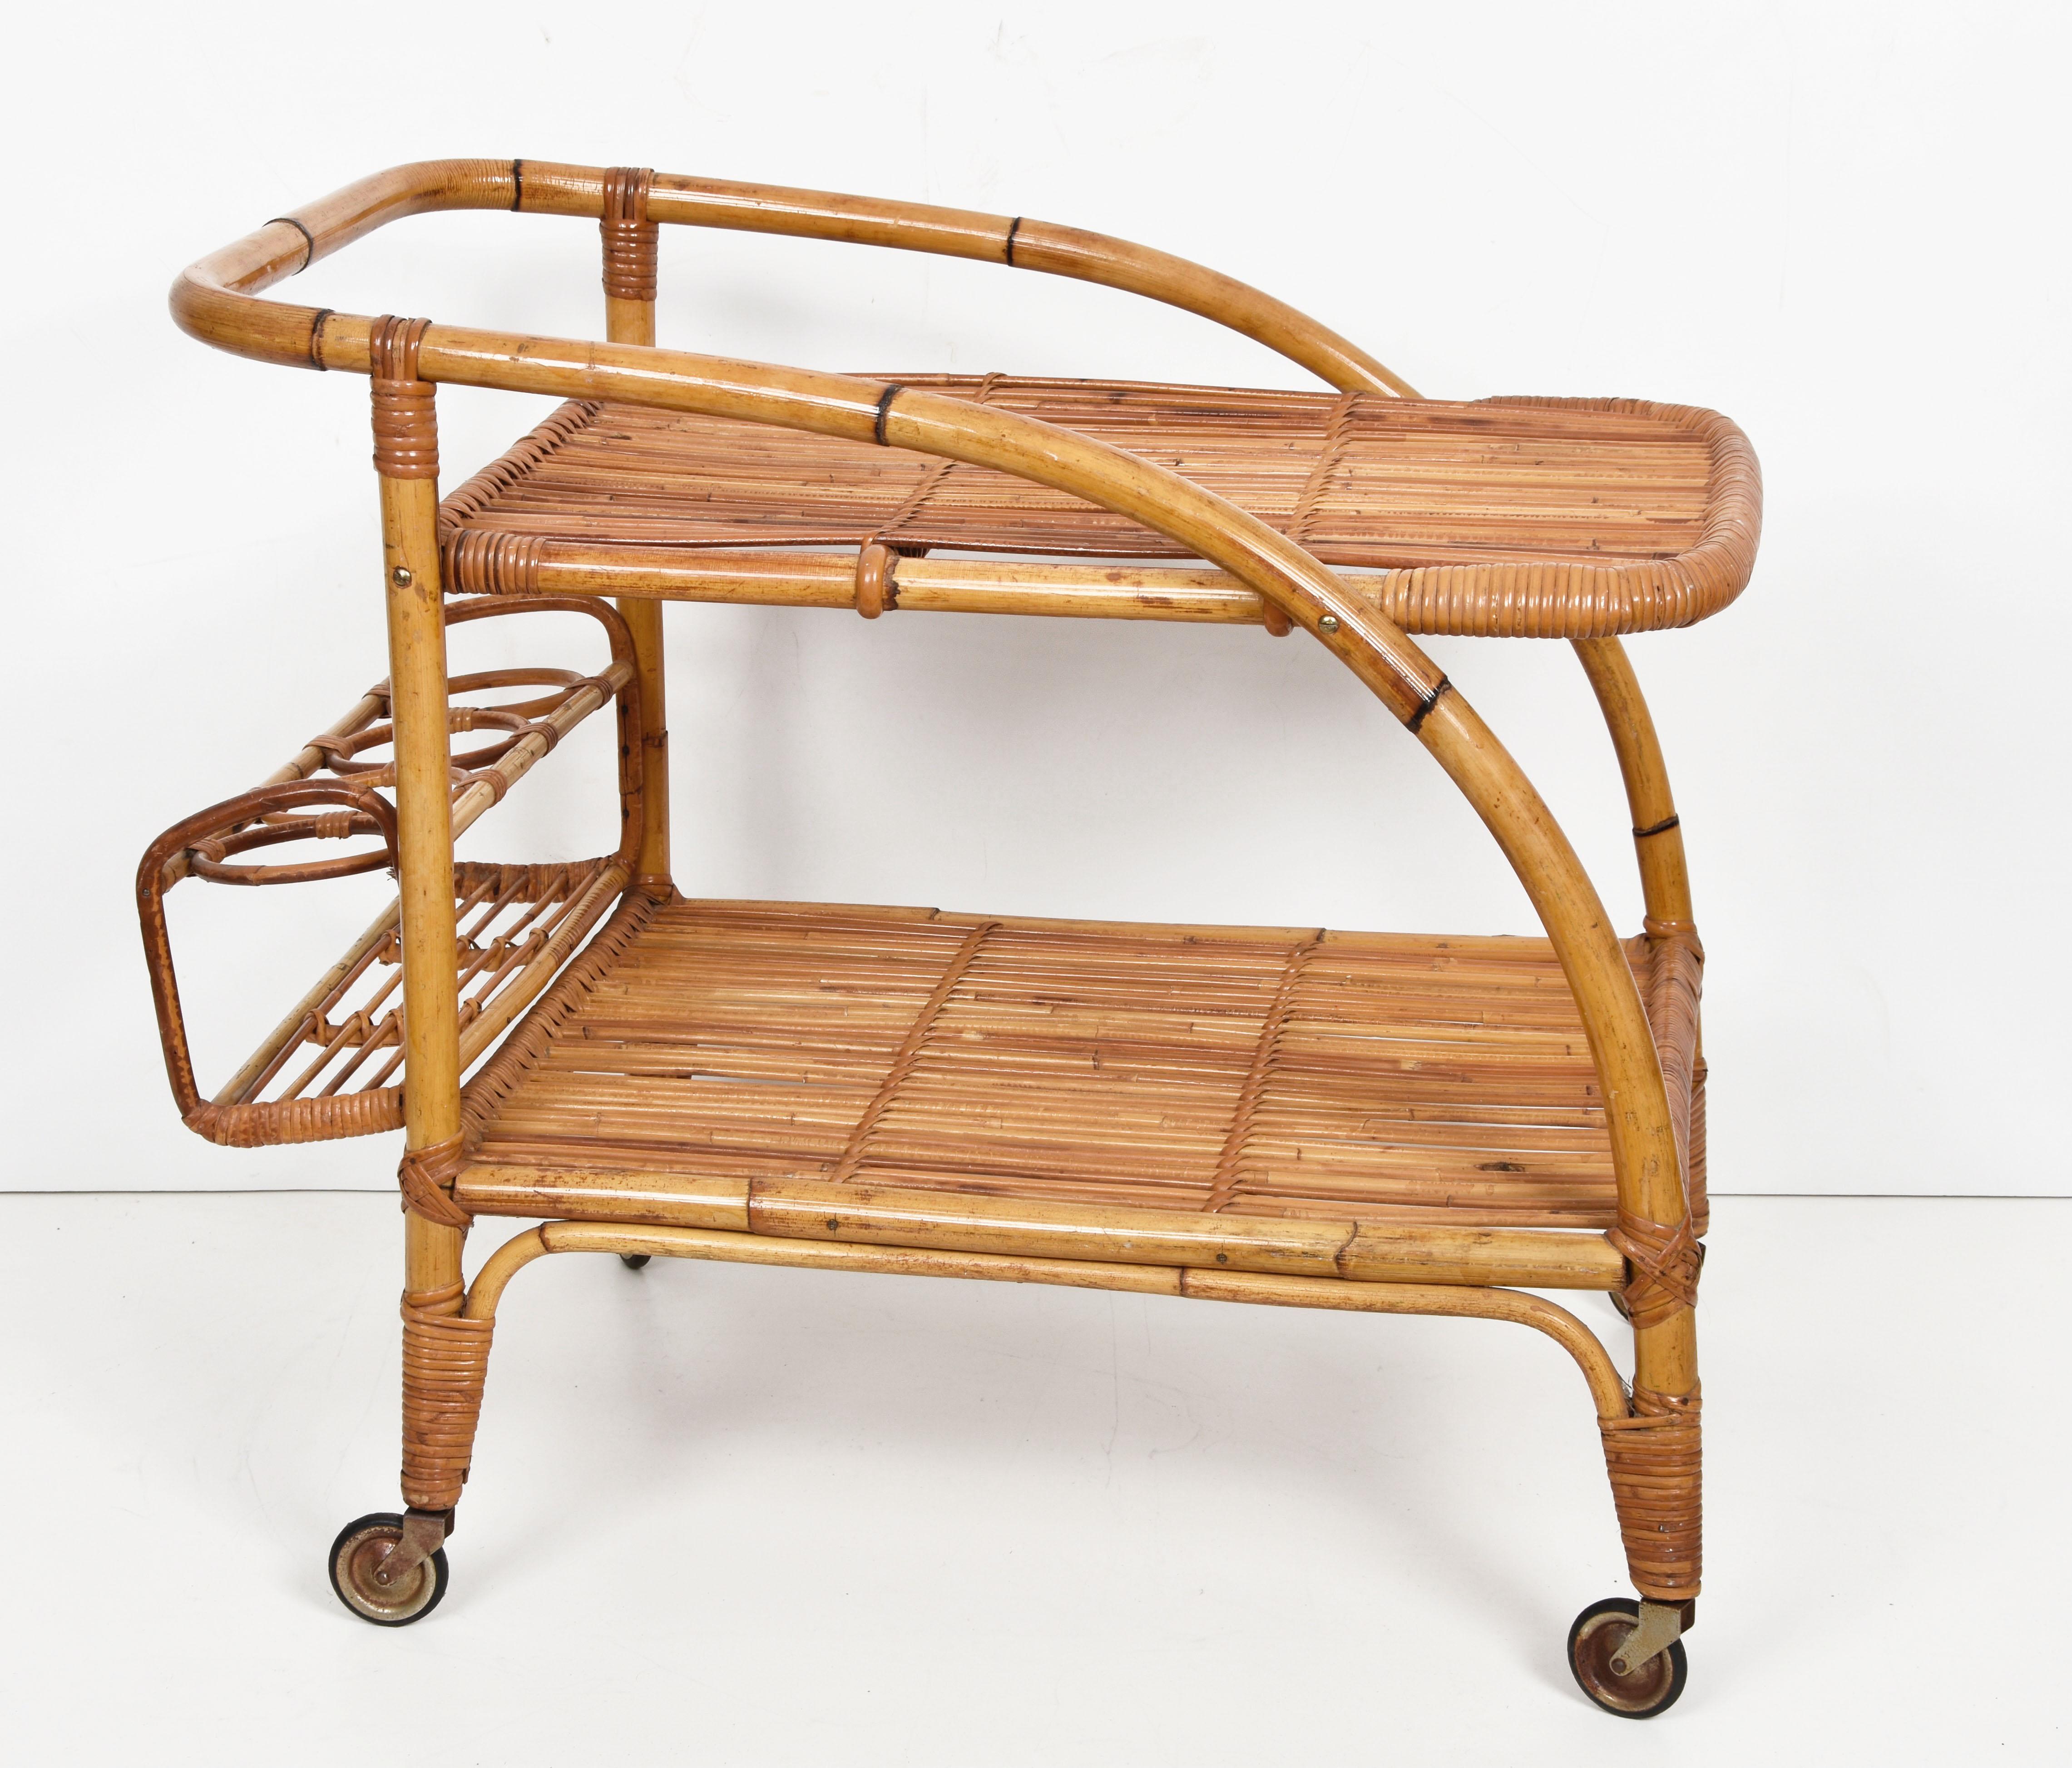 Midcentury bamboo and rattan Italian serving bar cart trolley with two large wheels. This unique piece was produced in Italy during the 1950s.

A marvellous item that is in fantastic vintage conditions, with two large wheels and an external bottle